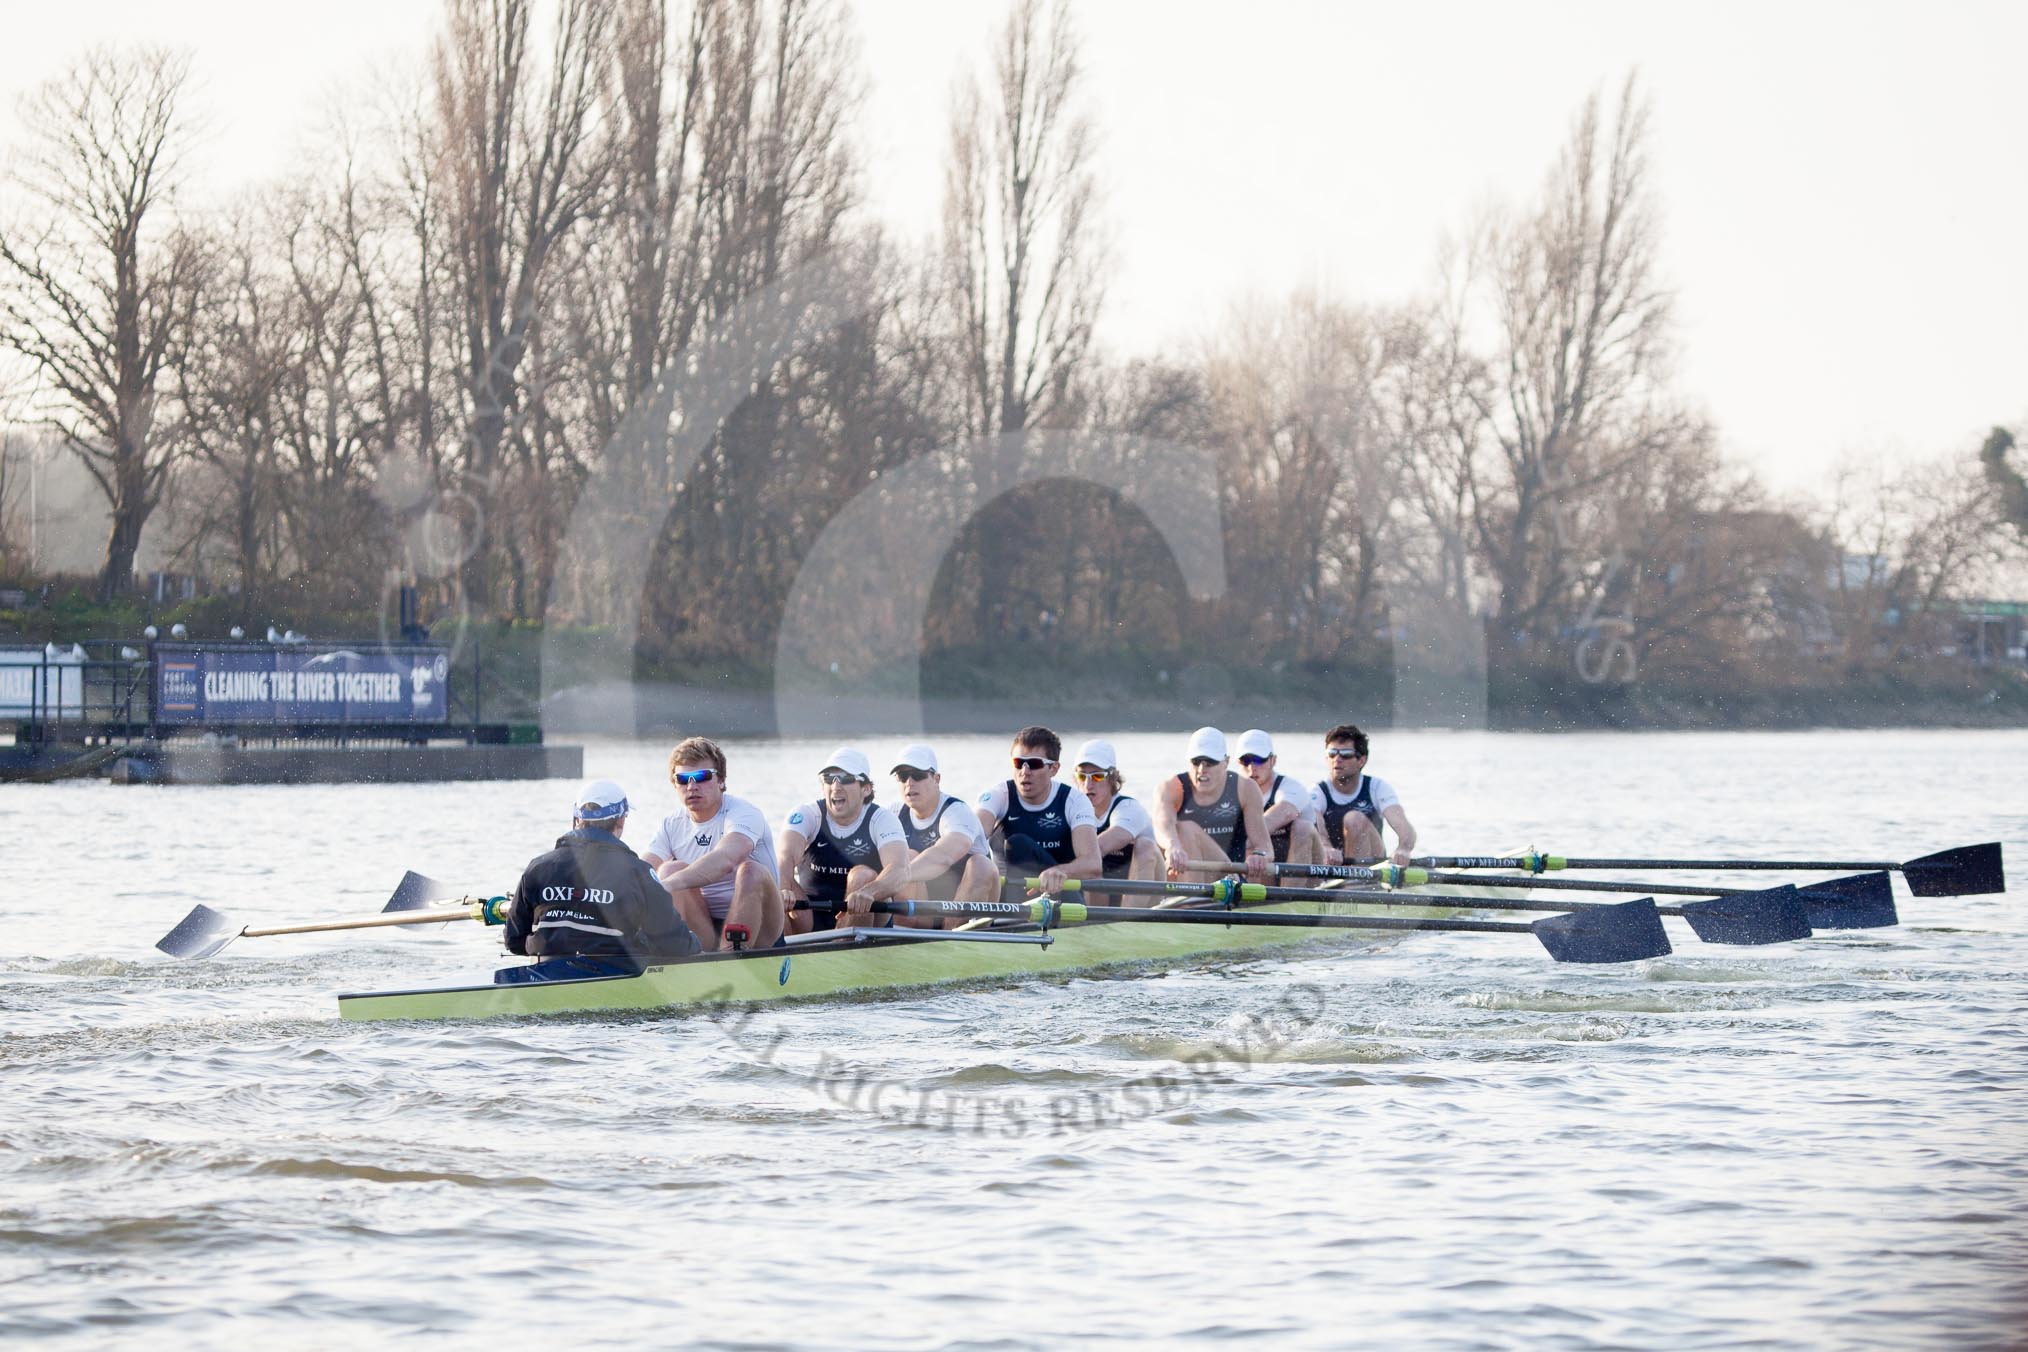 The Boat Race season 2014 - fixture OUBC vs German U23: The OUBC boat..
River Thames between Putney Bridge and Chiswick Bridge,



on 08 March 2014 at 16:47, image #60